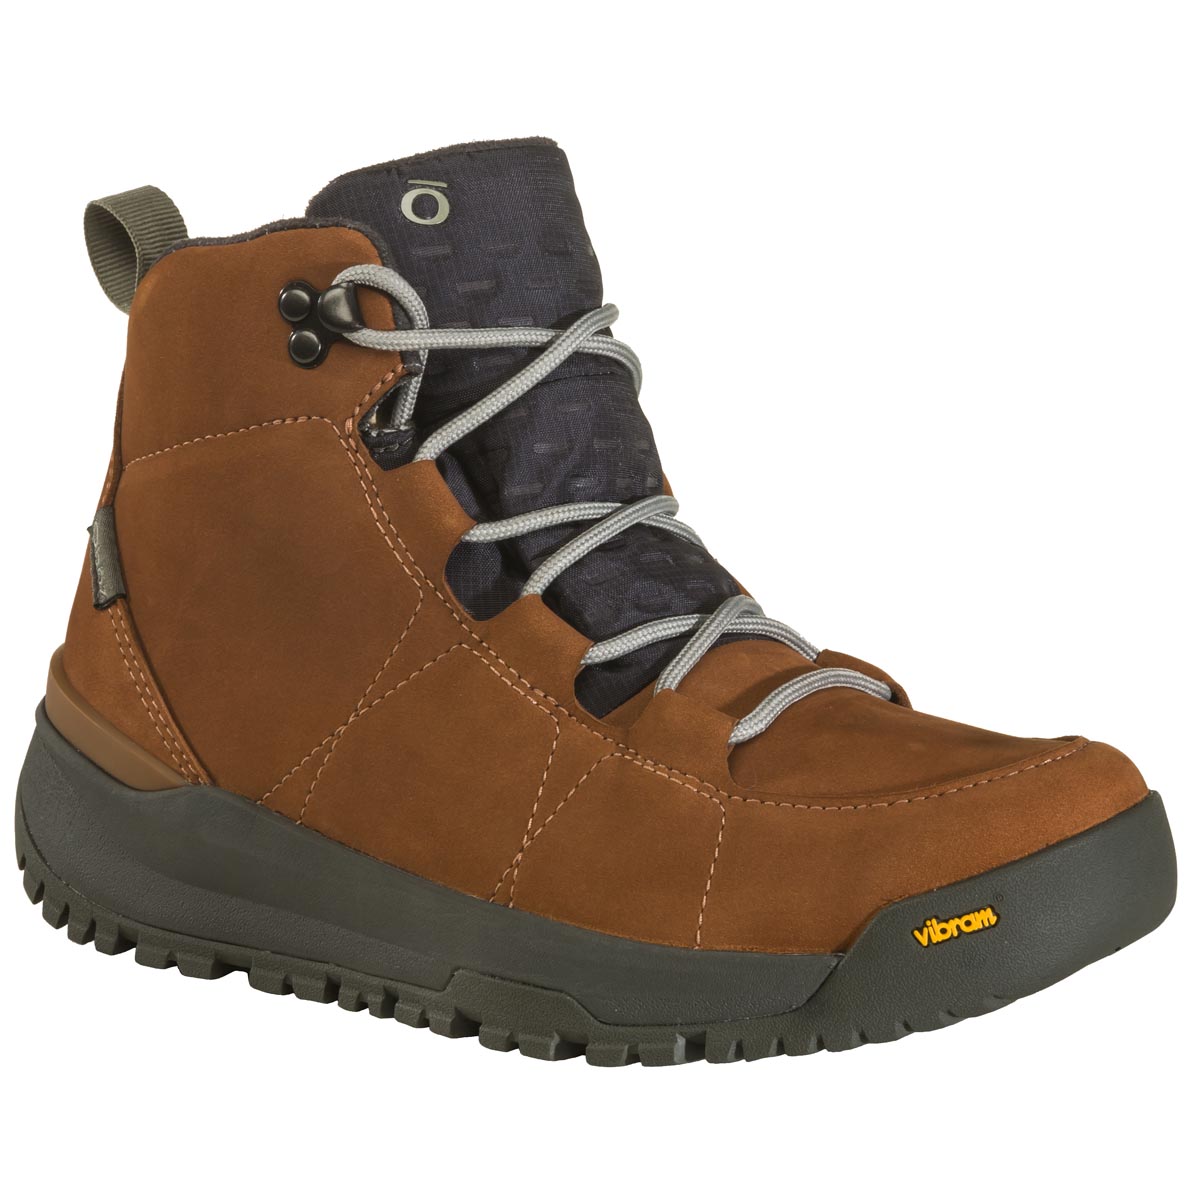 Oboz Women's Sphinx Mid Insulated B-DRY